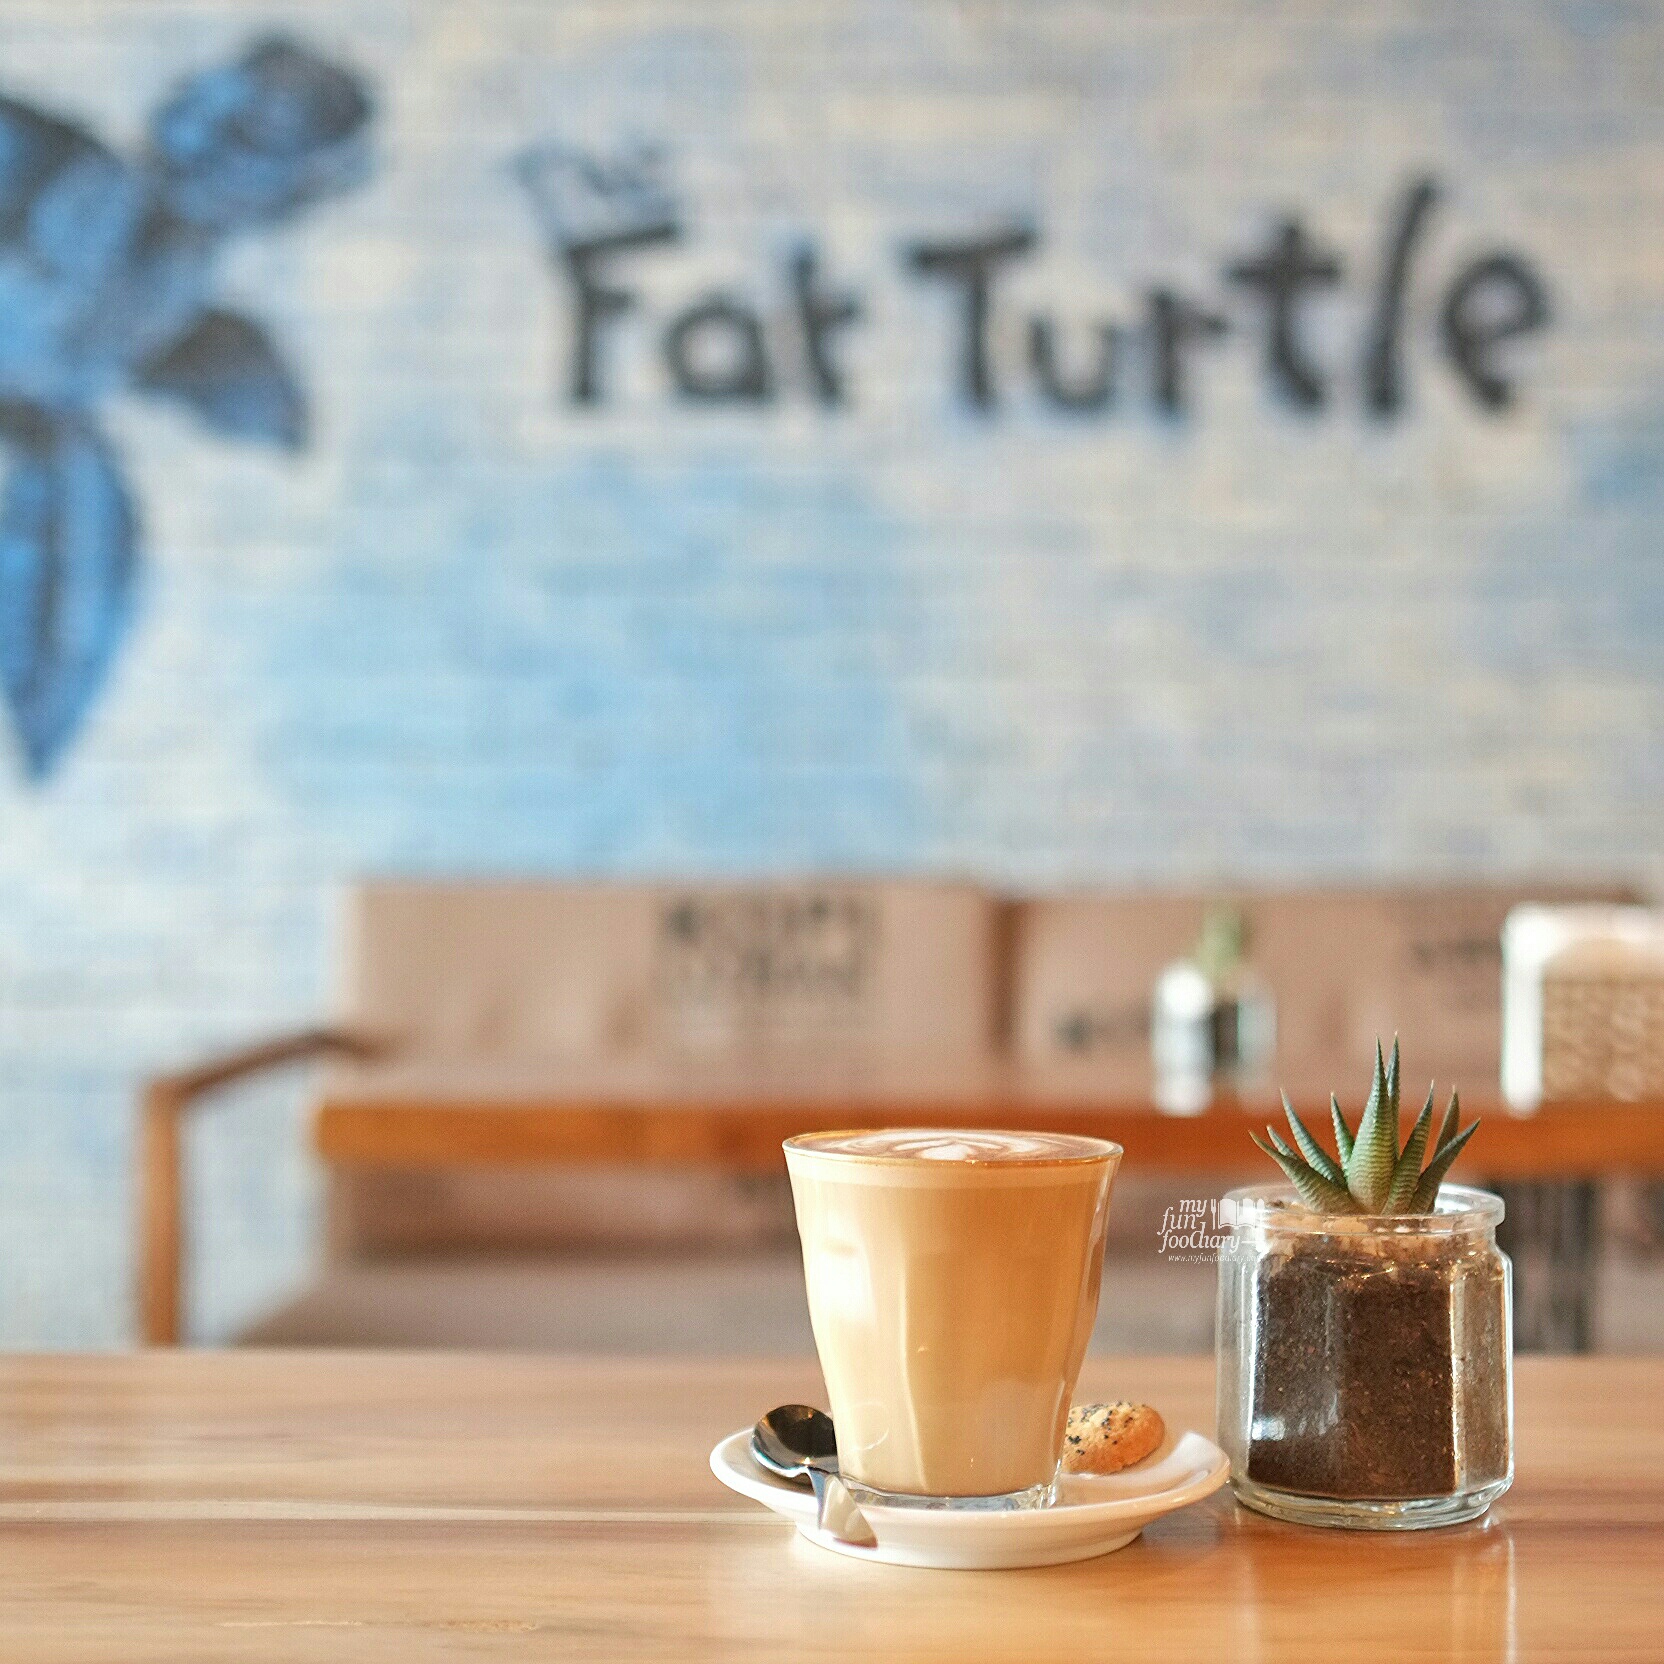 Cafe Latte at The Fat Turtle by Myfunfoodiary